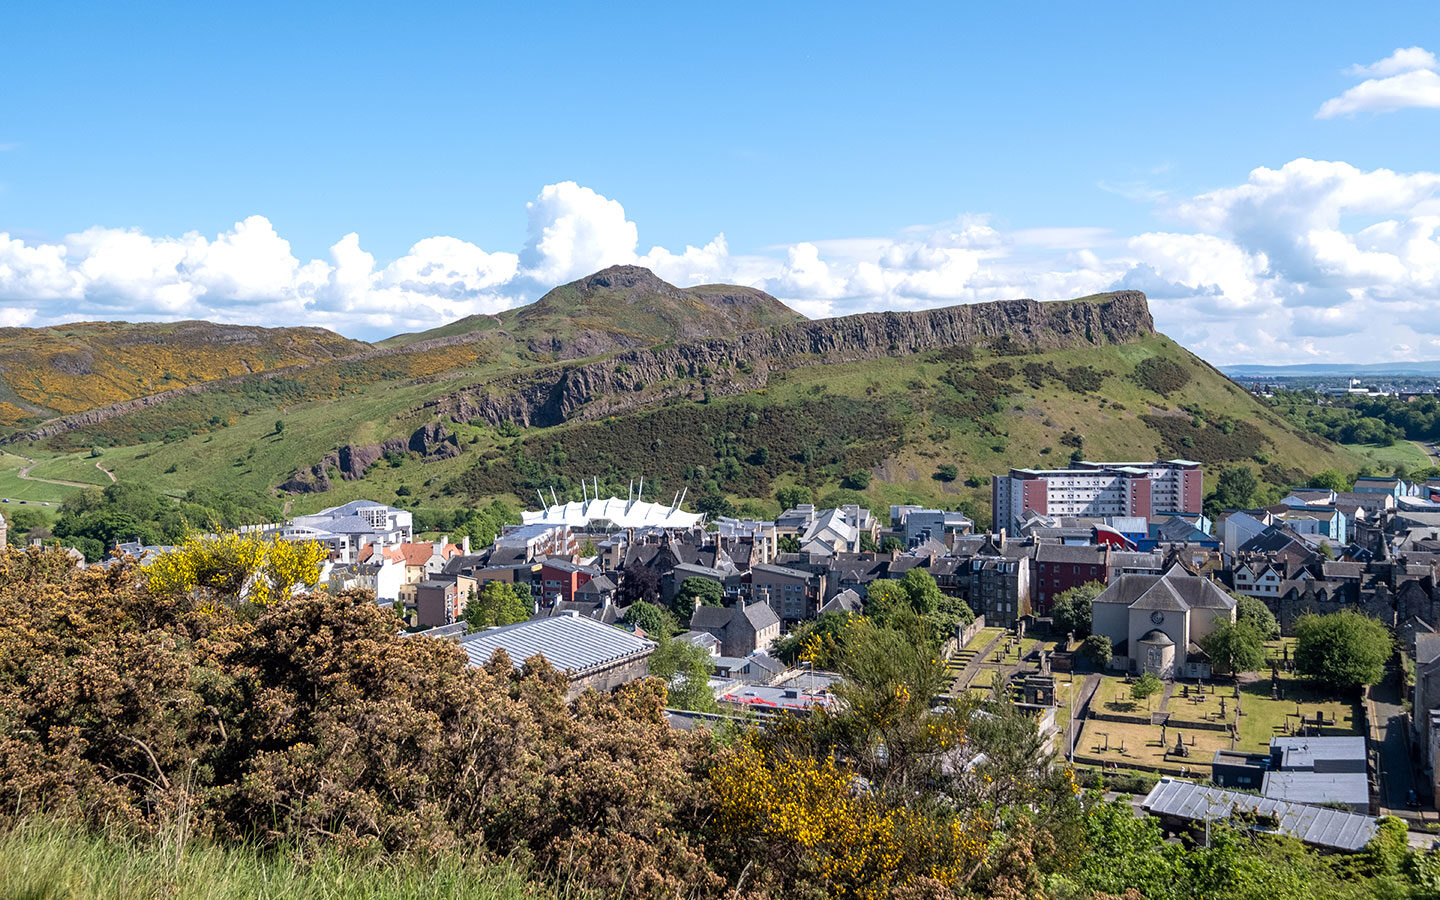 Views of Arthur's Seat and Dynamic Earth from Calton Hill